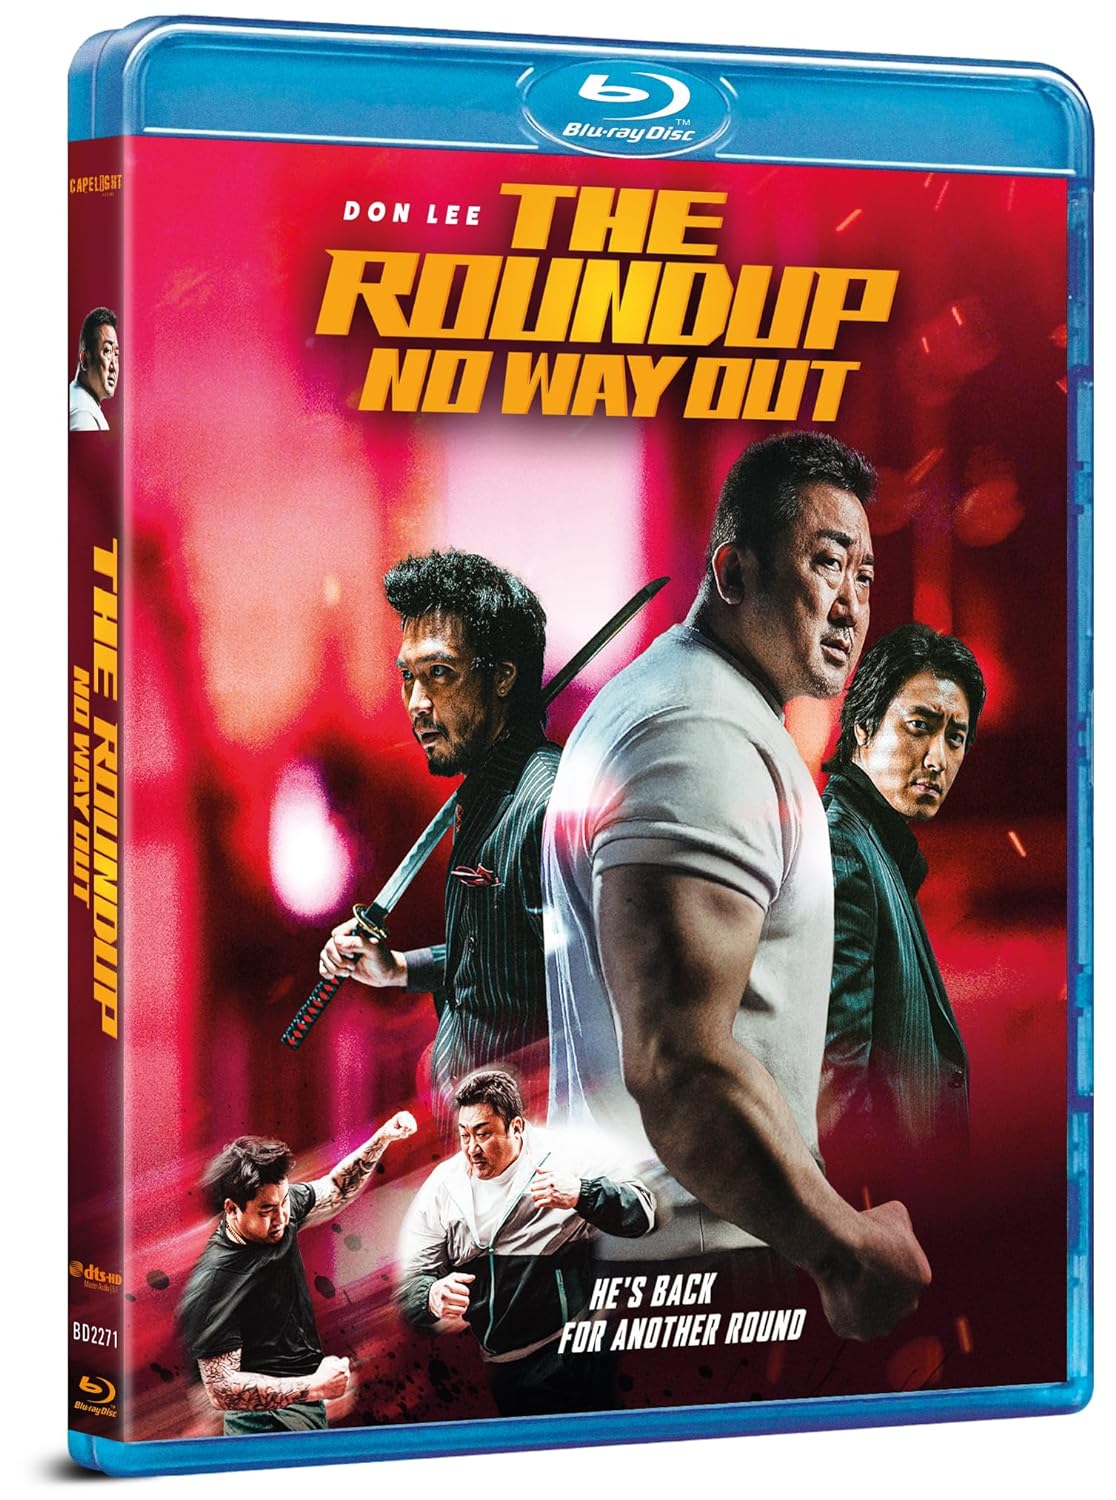 HighDefDiscNews.com on X: THE ROUNDUP: NO WAY OUT [2023] is coming to  Blu-ray Disc in the United States on April 9th via MPI Home Video. It's now  available as a functional preorder